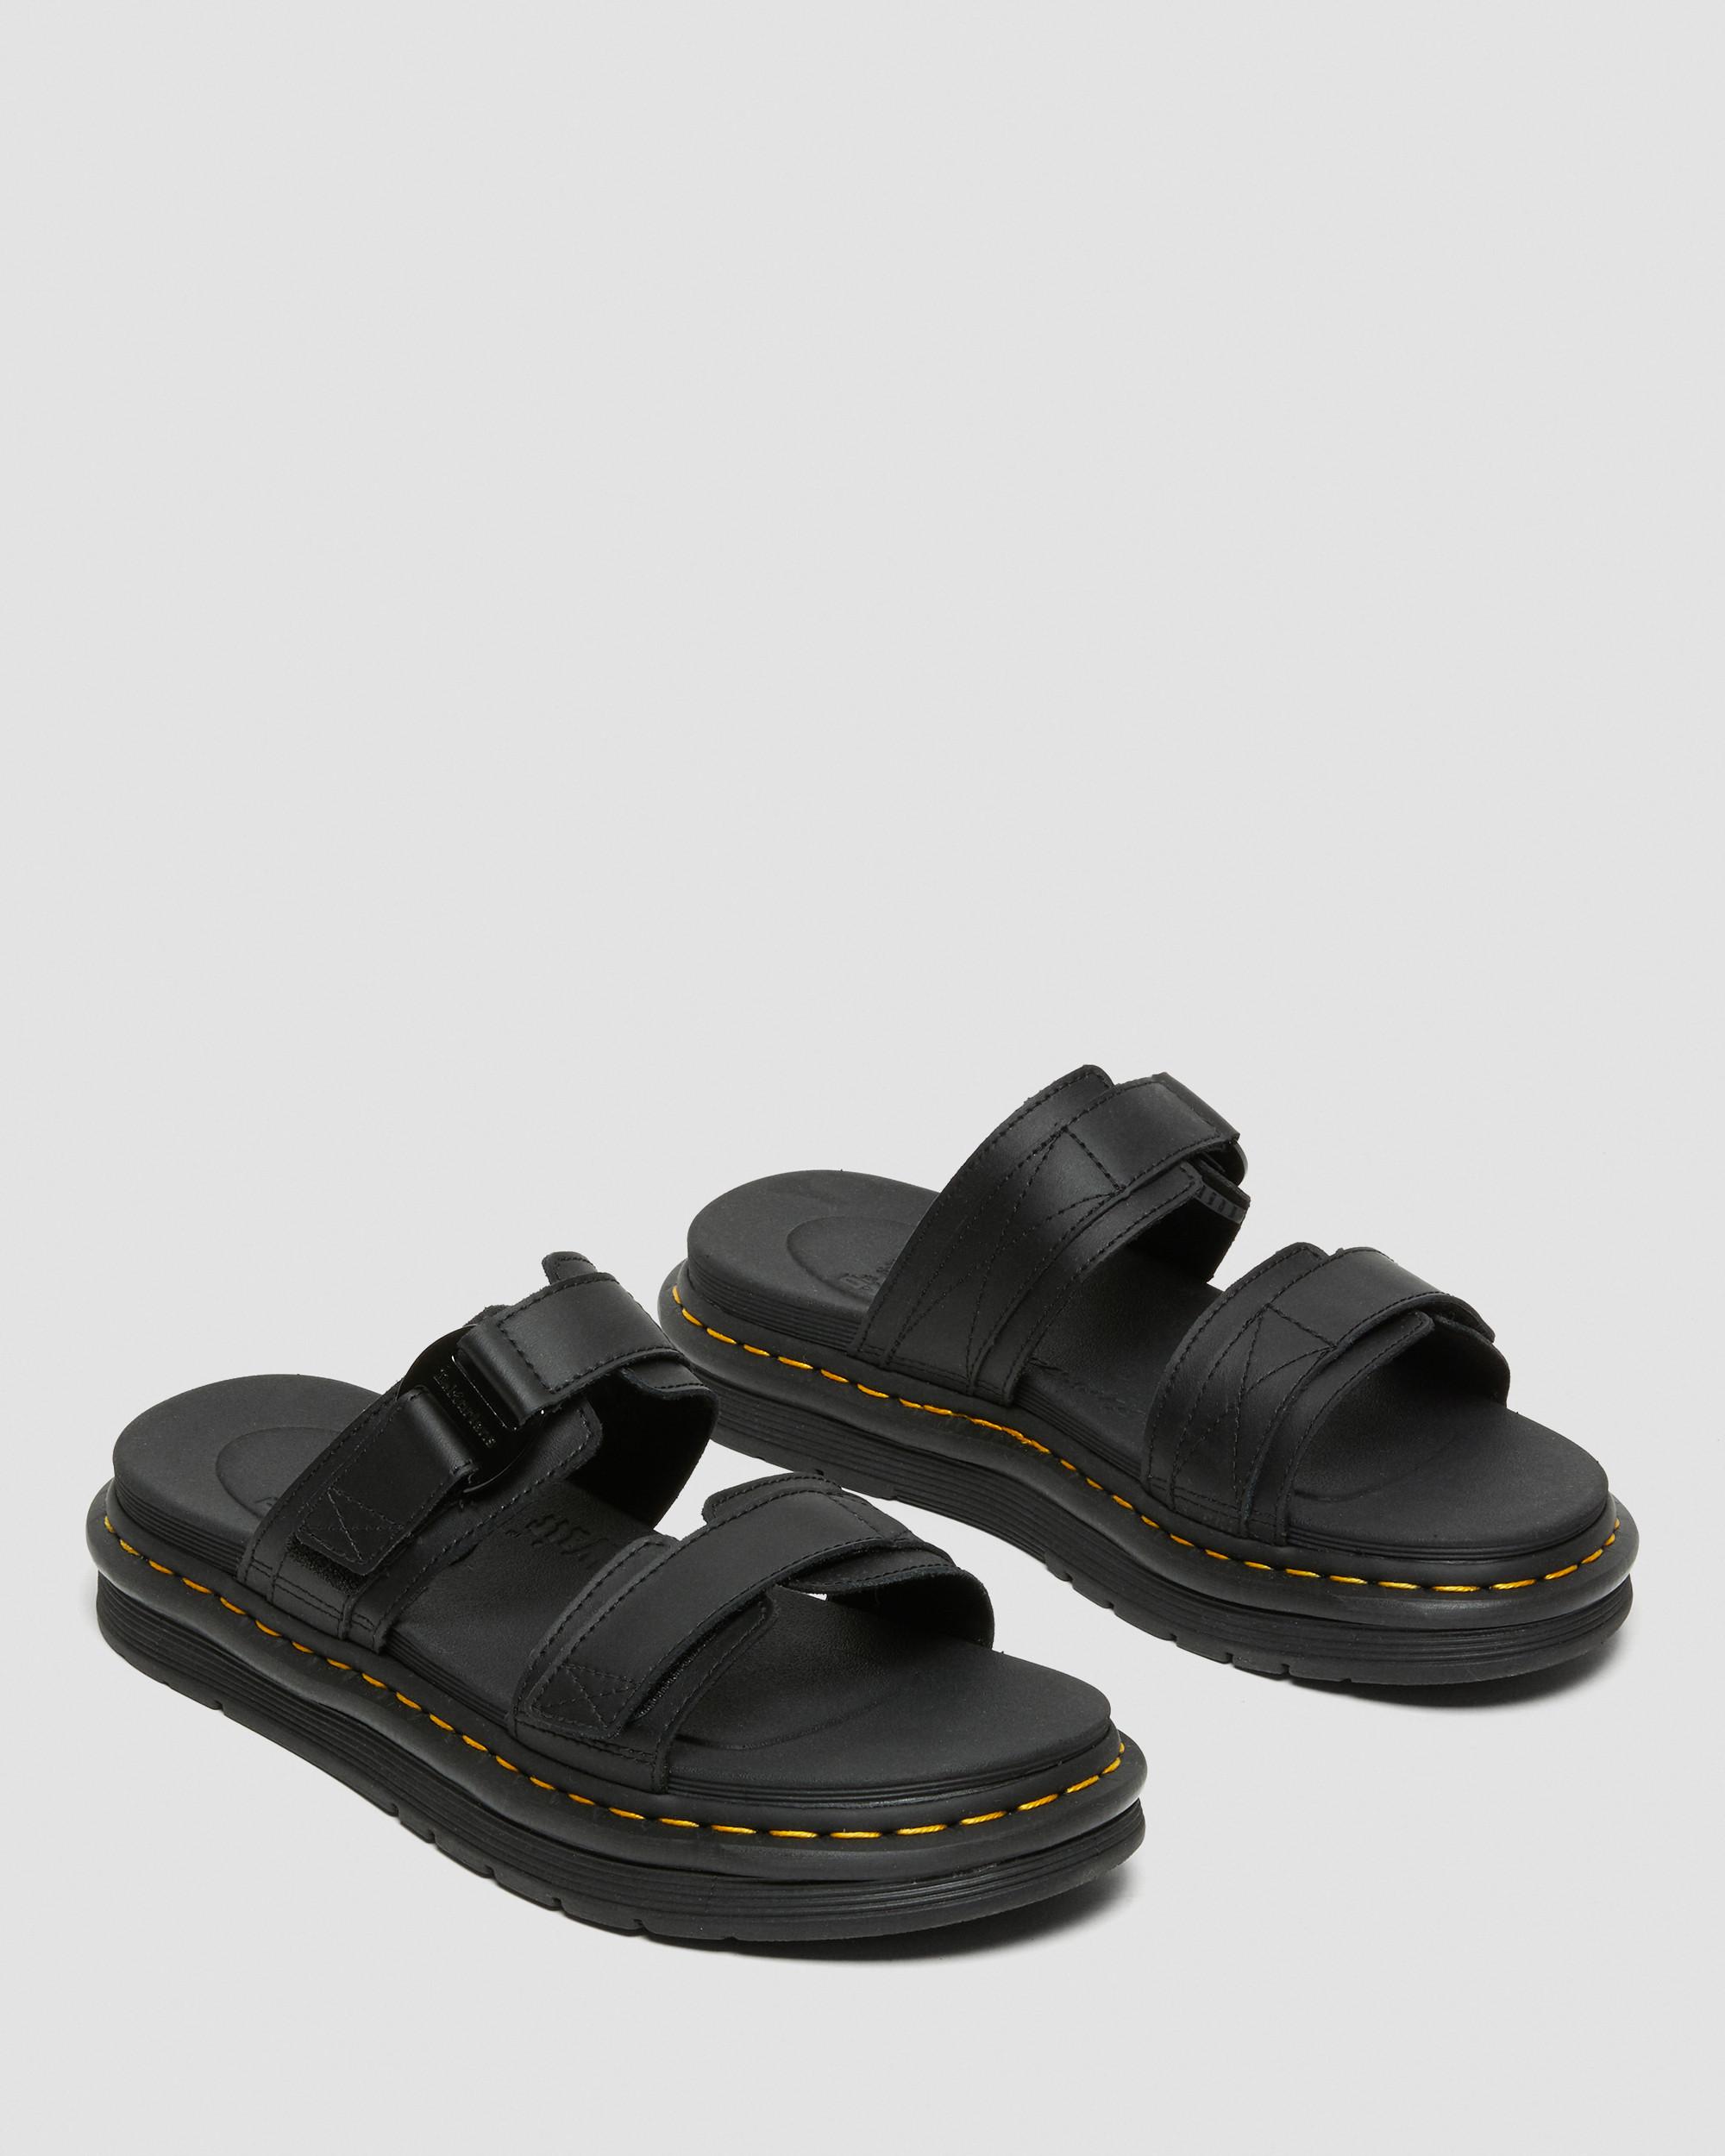 Leather Sandals For Women, Leather Sliders